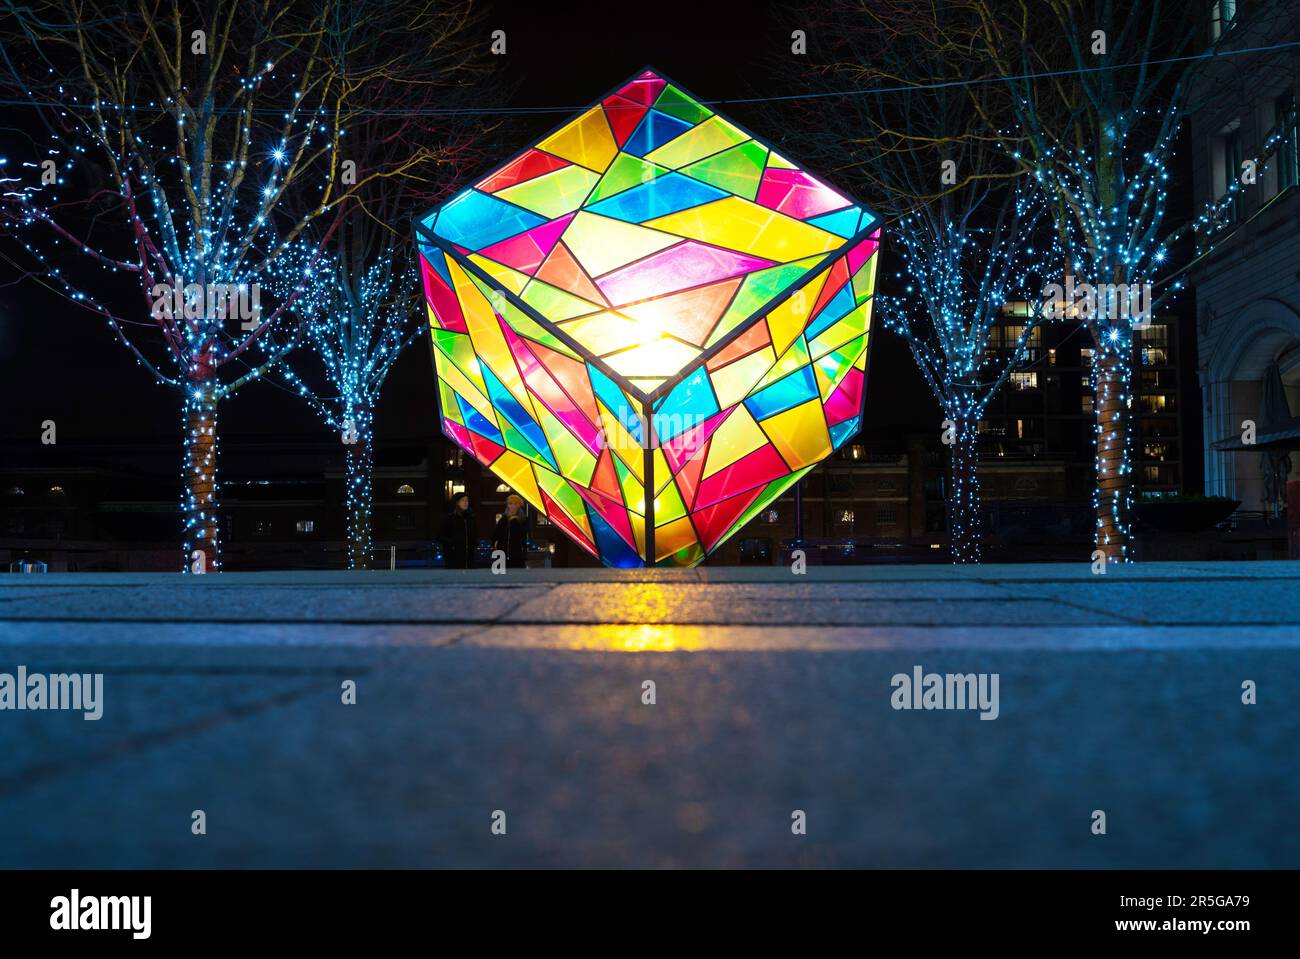 Light artwork Colour Cubed by Mandy Lights. This was part of the Connected by Light winter art light festival at Canary Wharf in 2020. Stock Photo